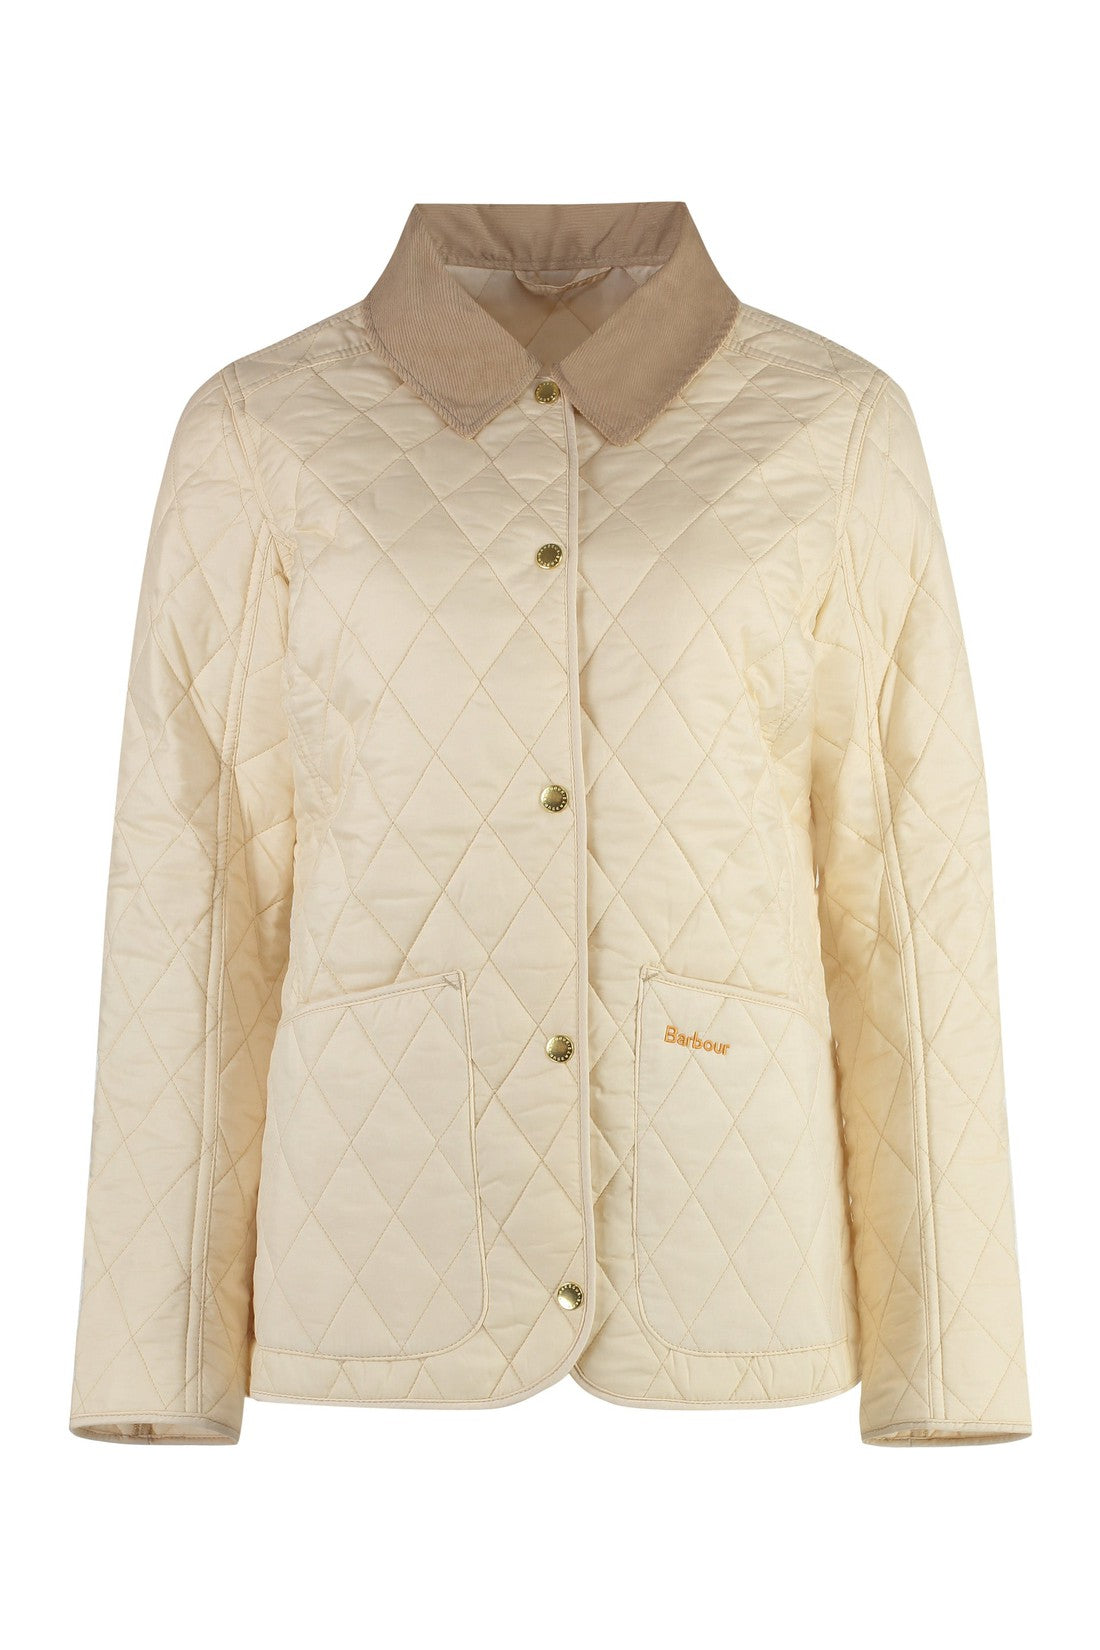 Barbour-OUTLET-SALE-Annandale quilted jacket-ARCHIVIST